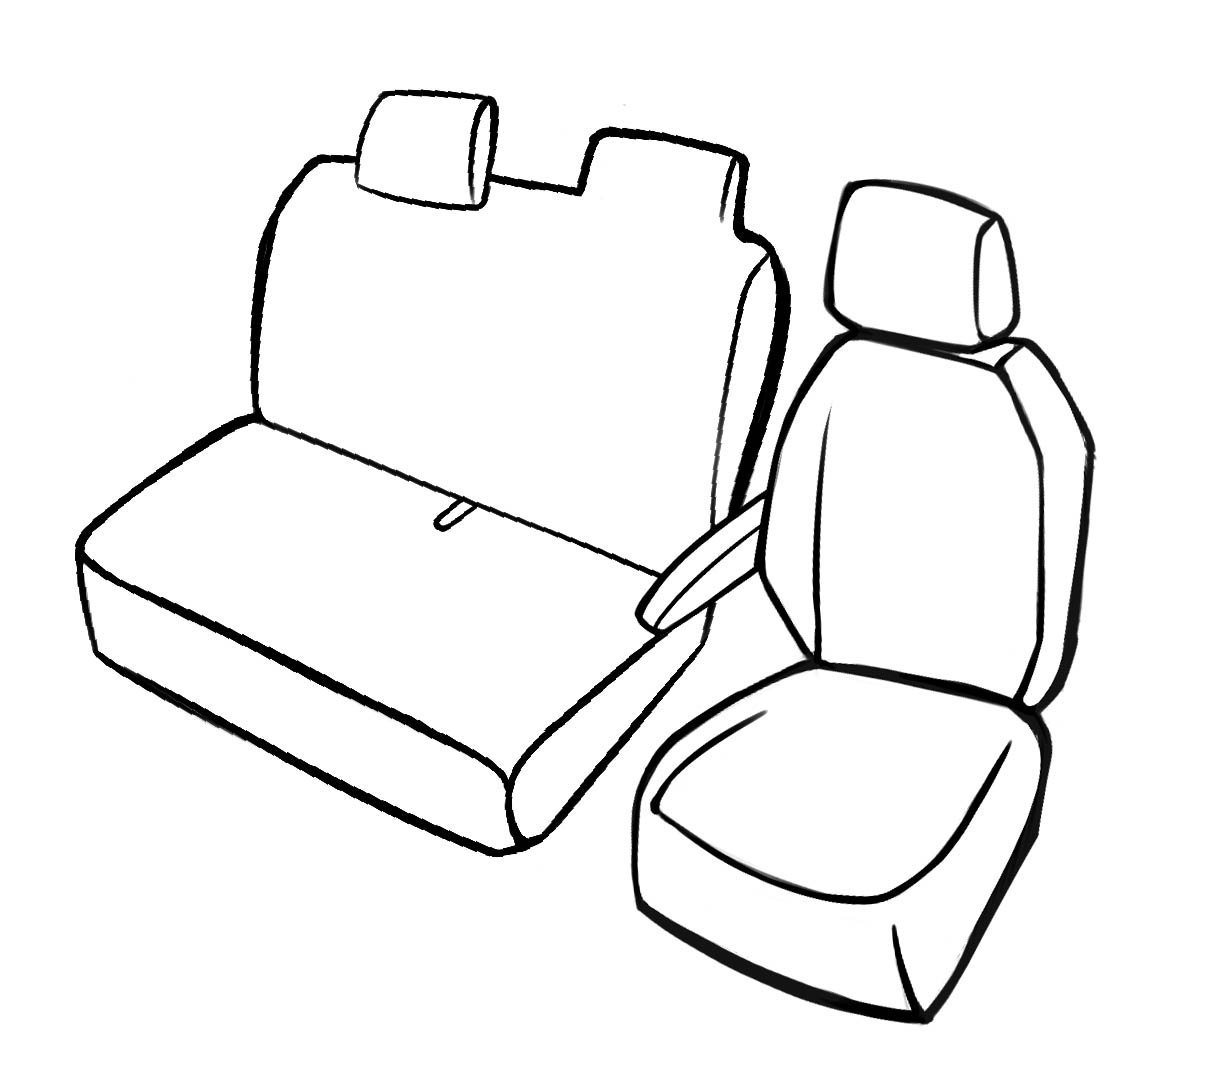 Premium Seat Cover for Citroen Jumper II 04/2006-Today, 1 single seat cover front + armrest cover, 1 double bench cover